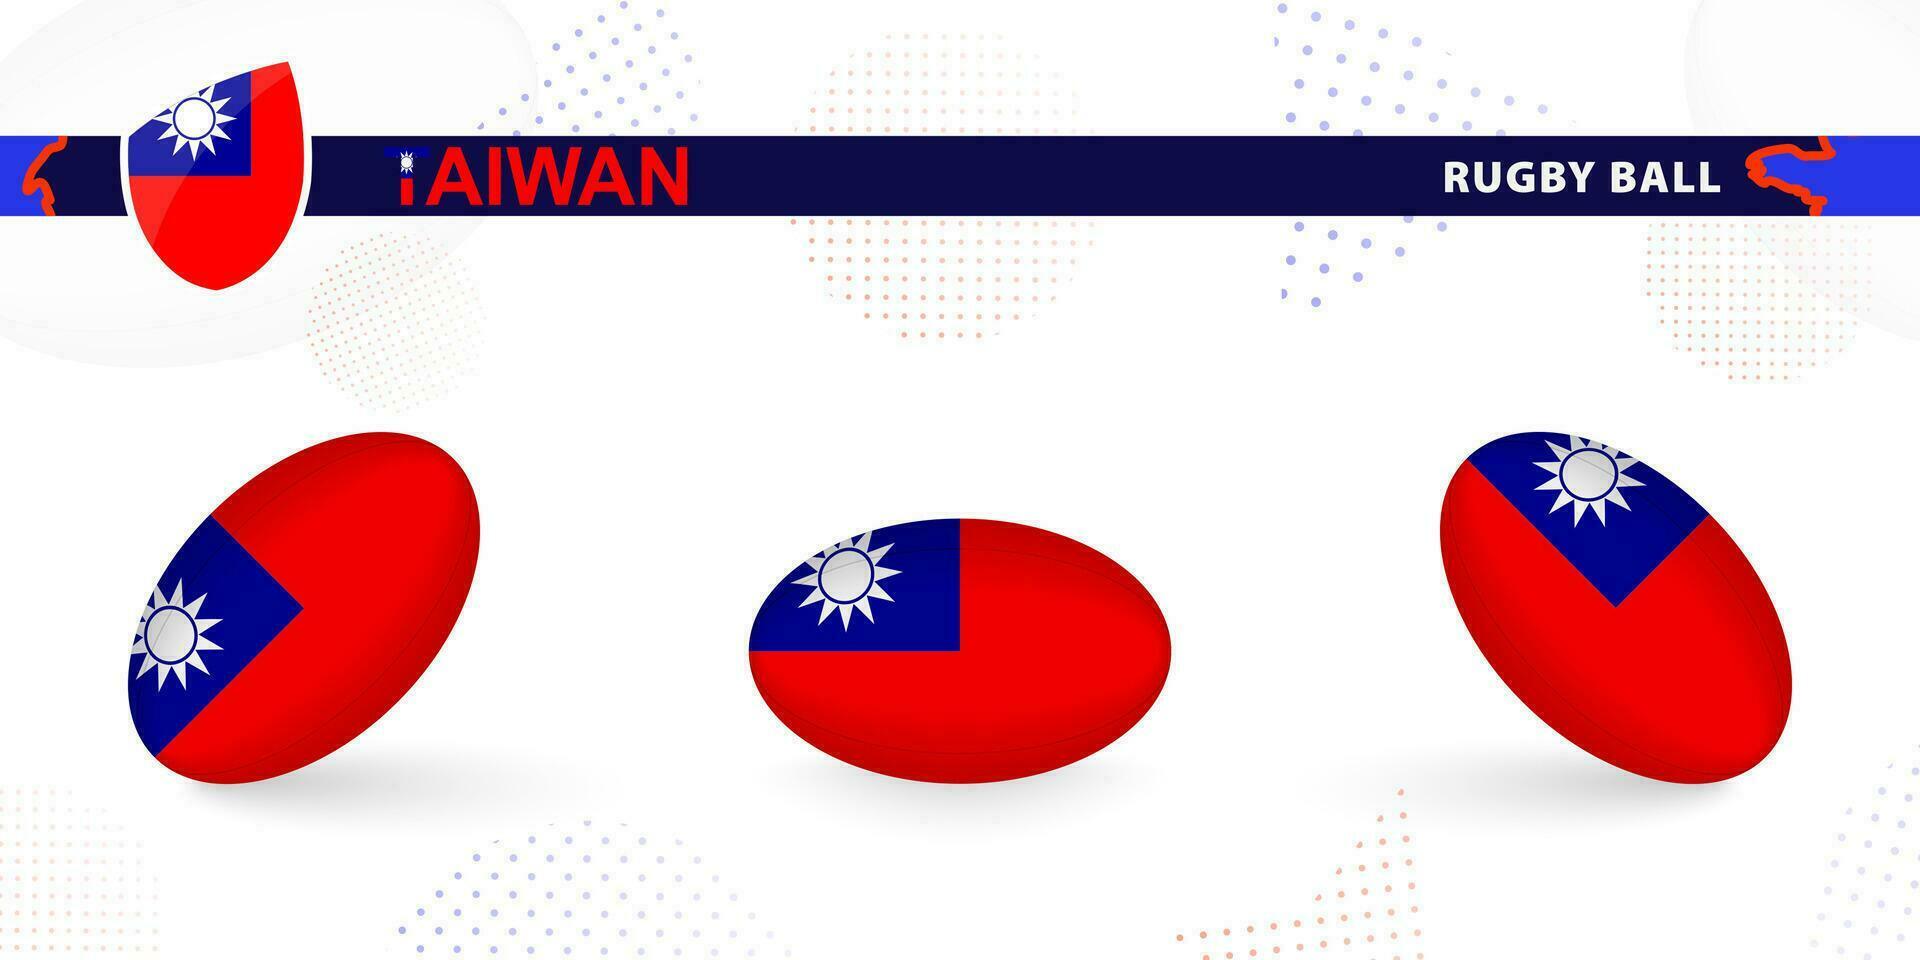 Rugby ball set with the flag of Taiwan in various angles on abstract background. vector